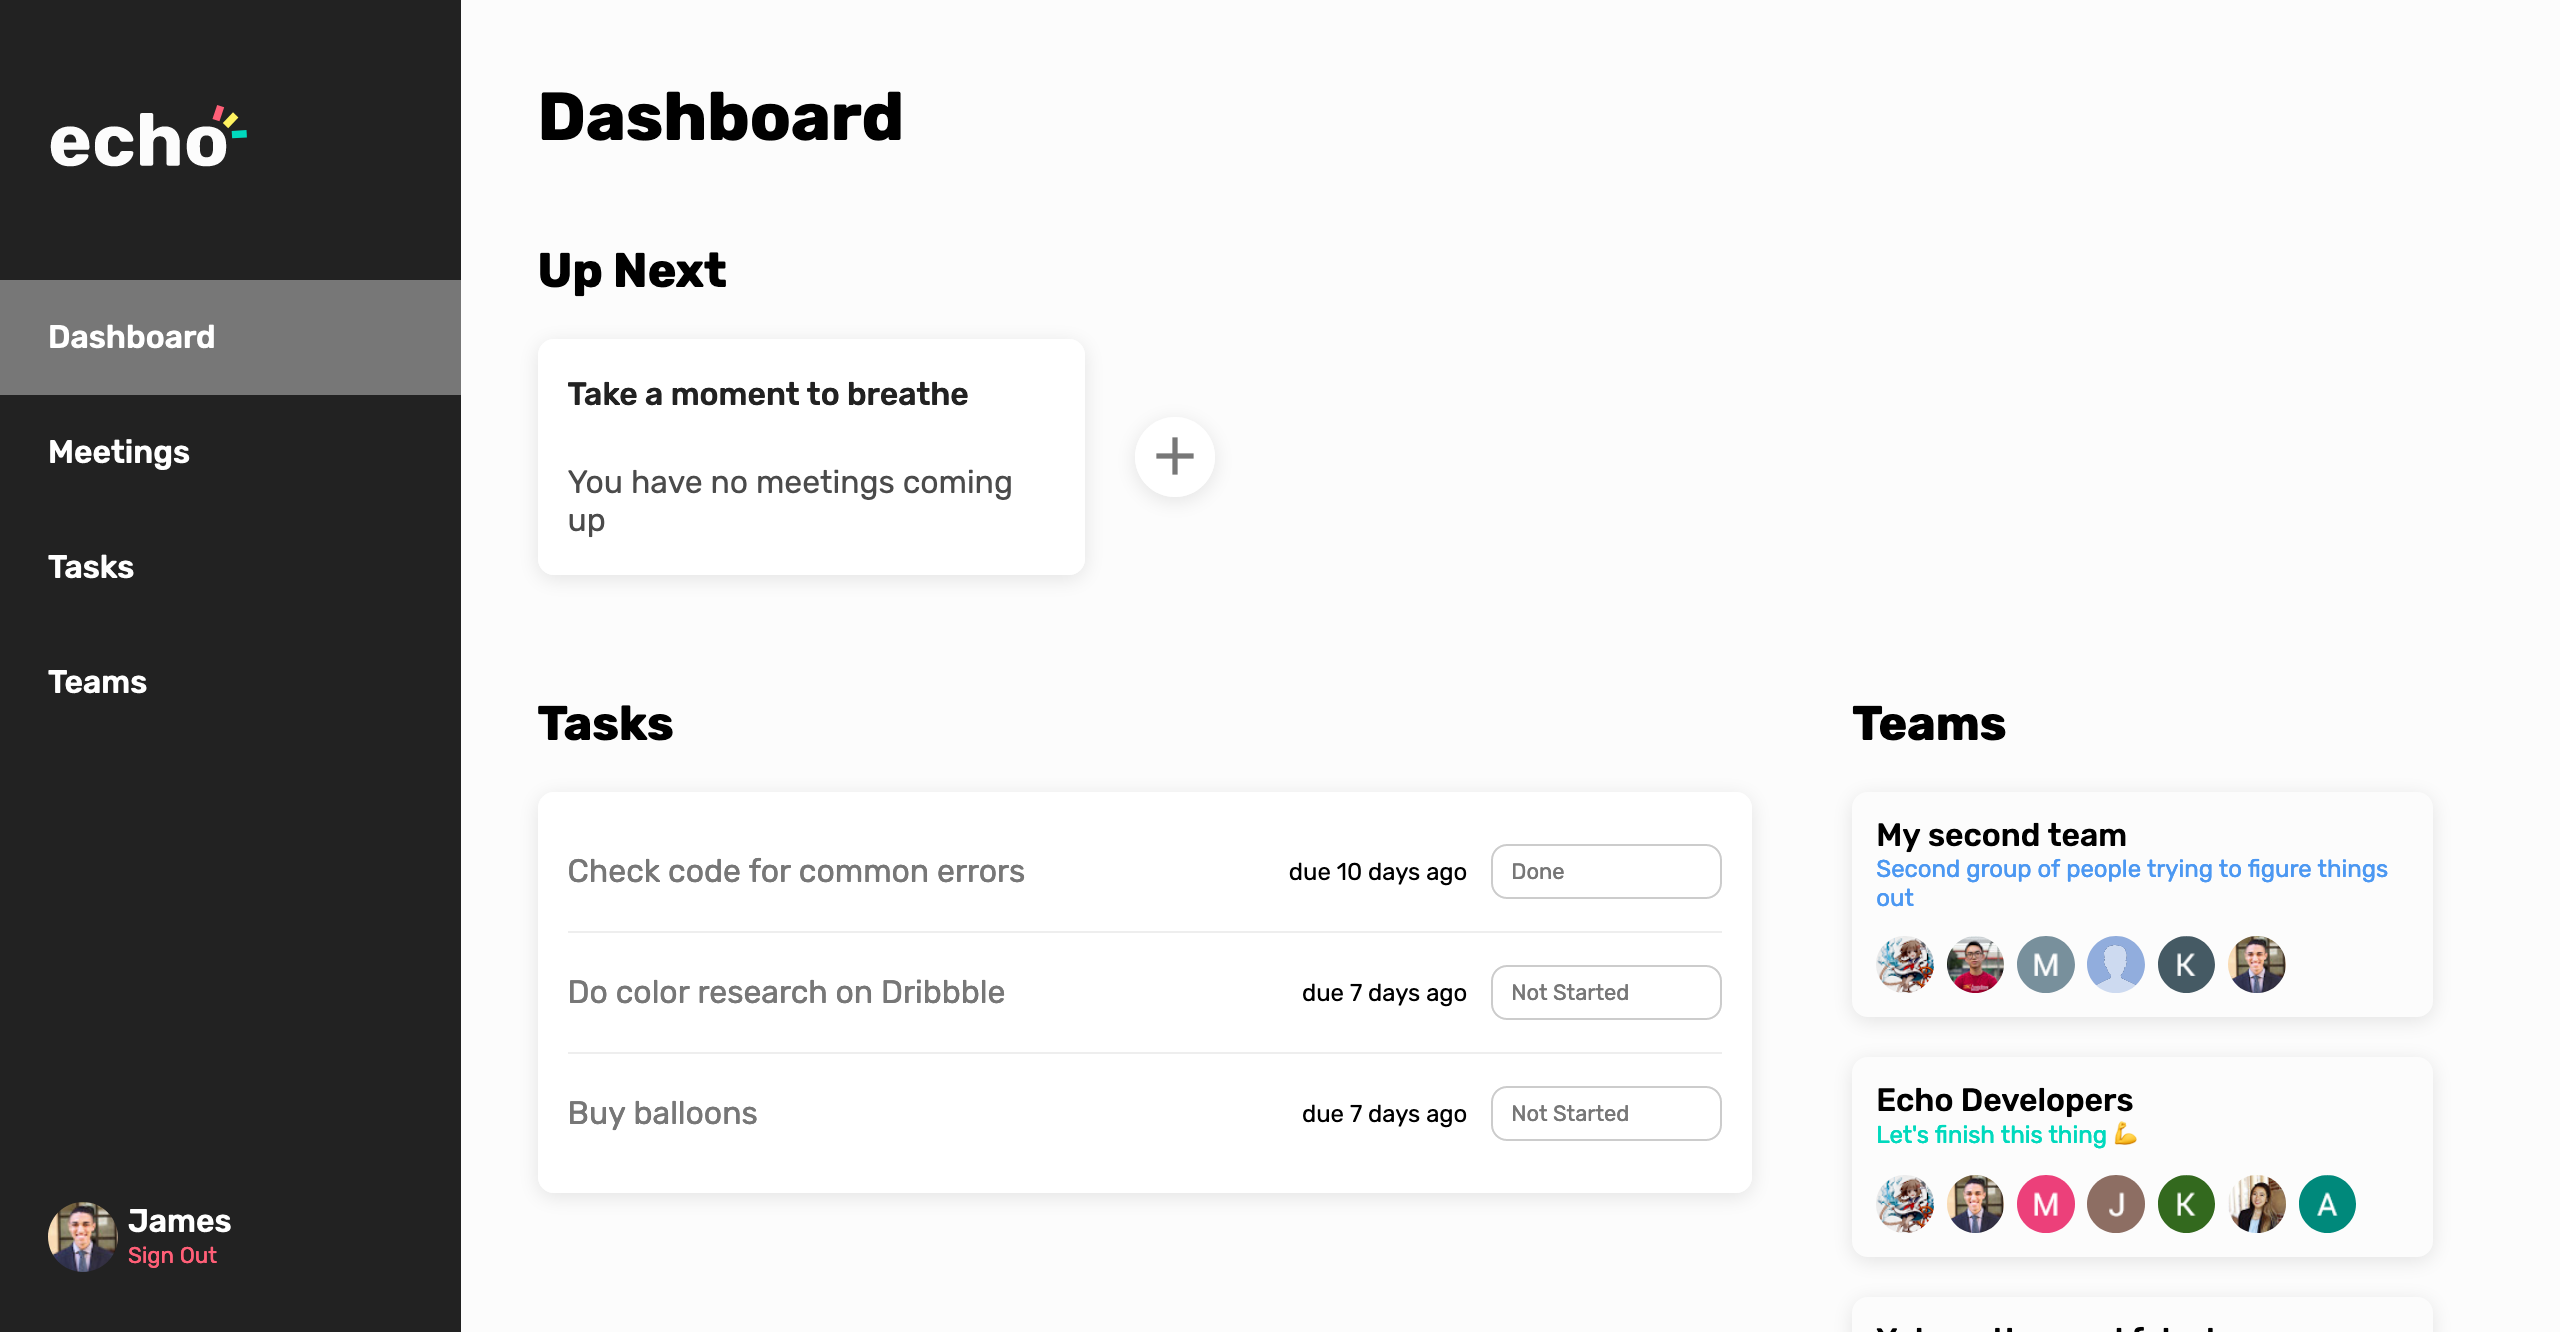 The echo dashboard screen, showing upcoming meetings, pending tasks, and available teams.